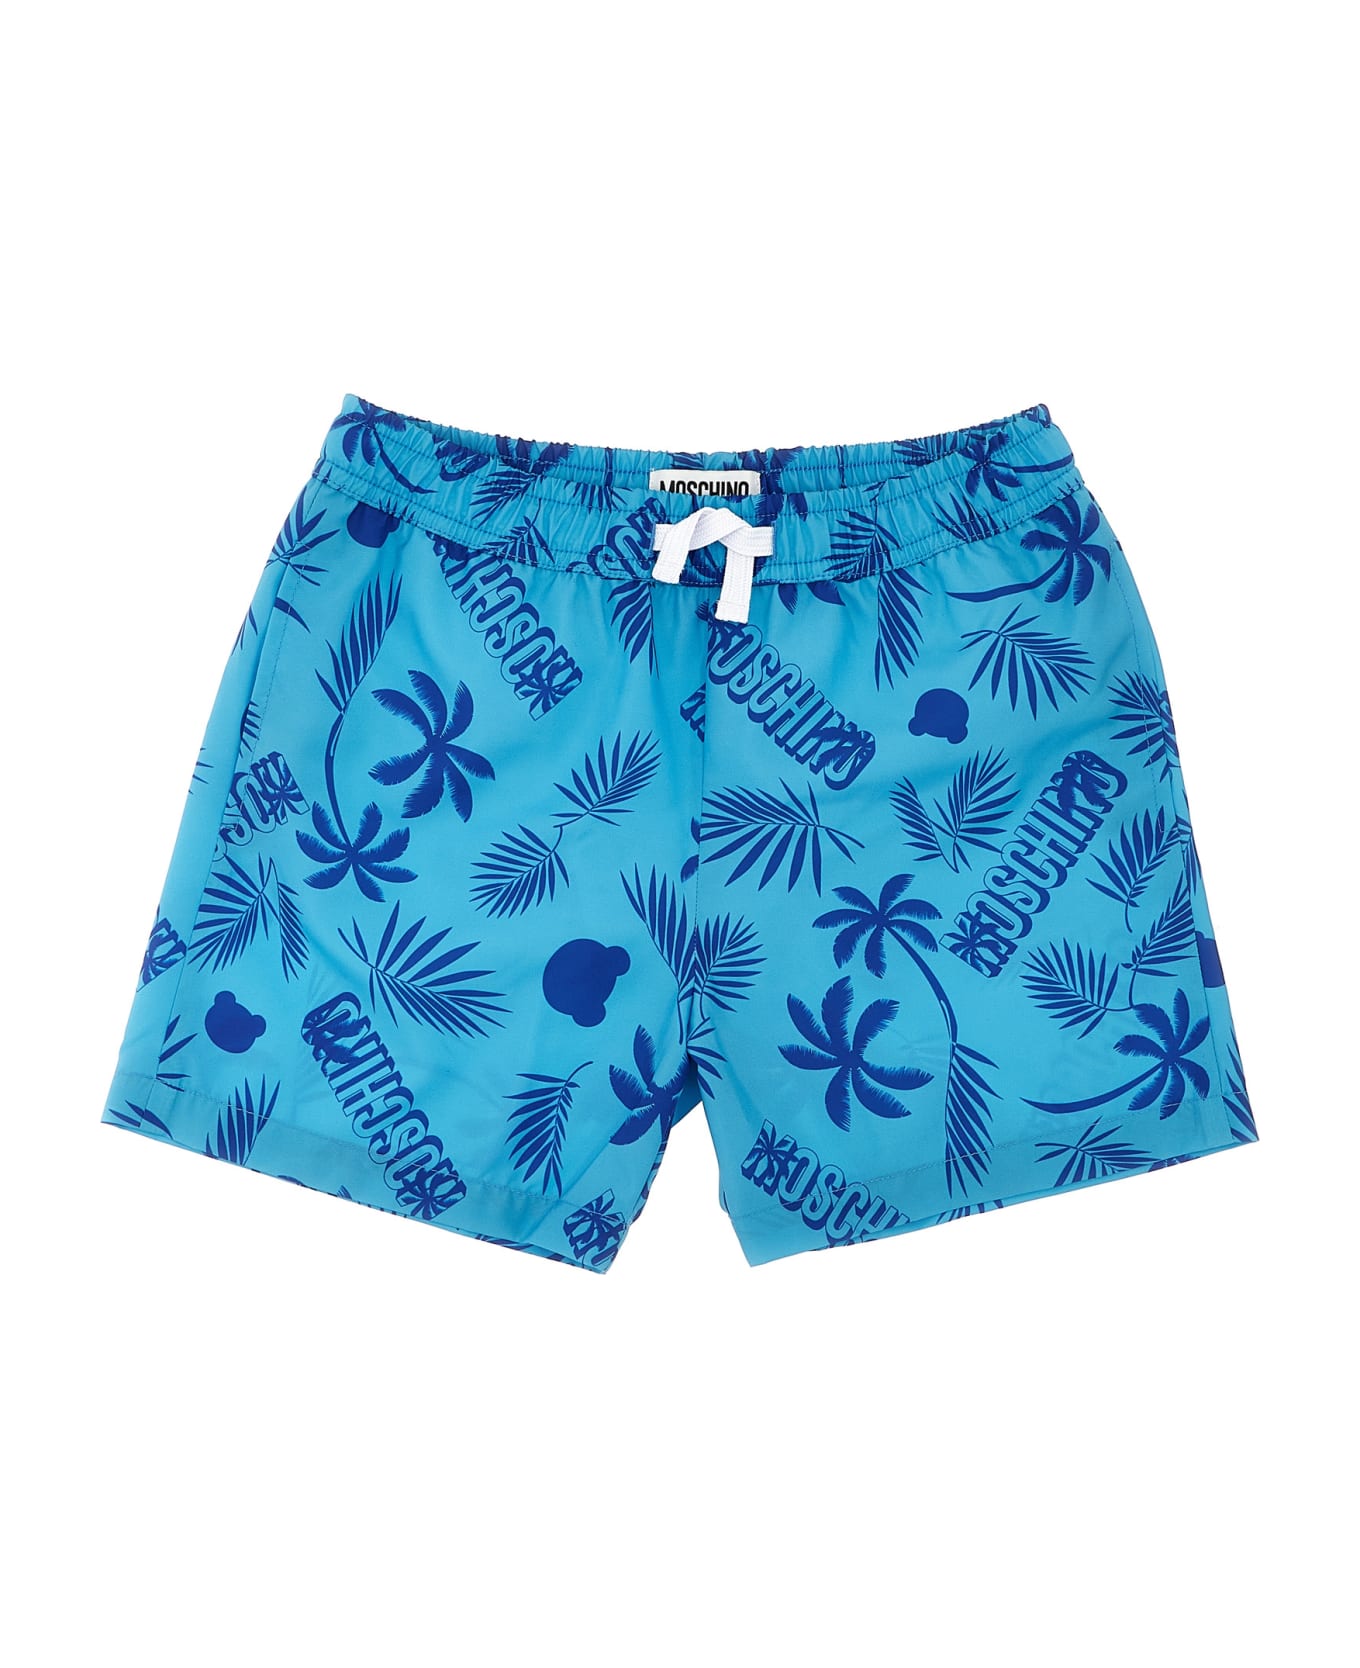 Moschino All Over Print Swimsuit - Light Blue